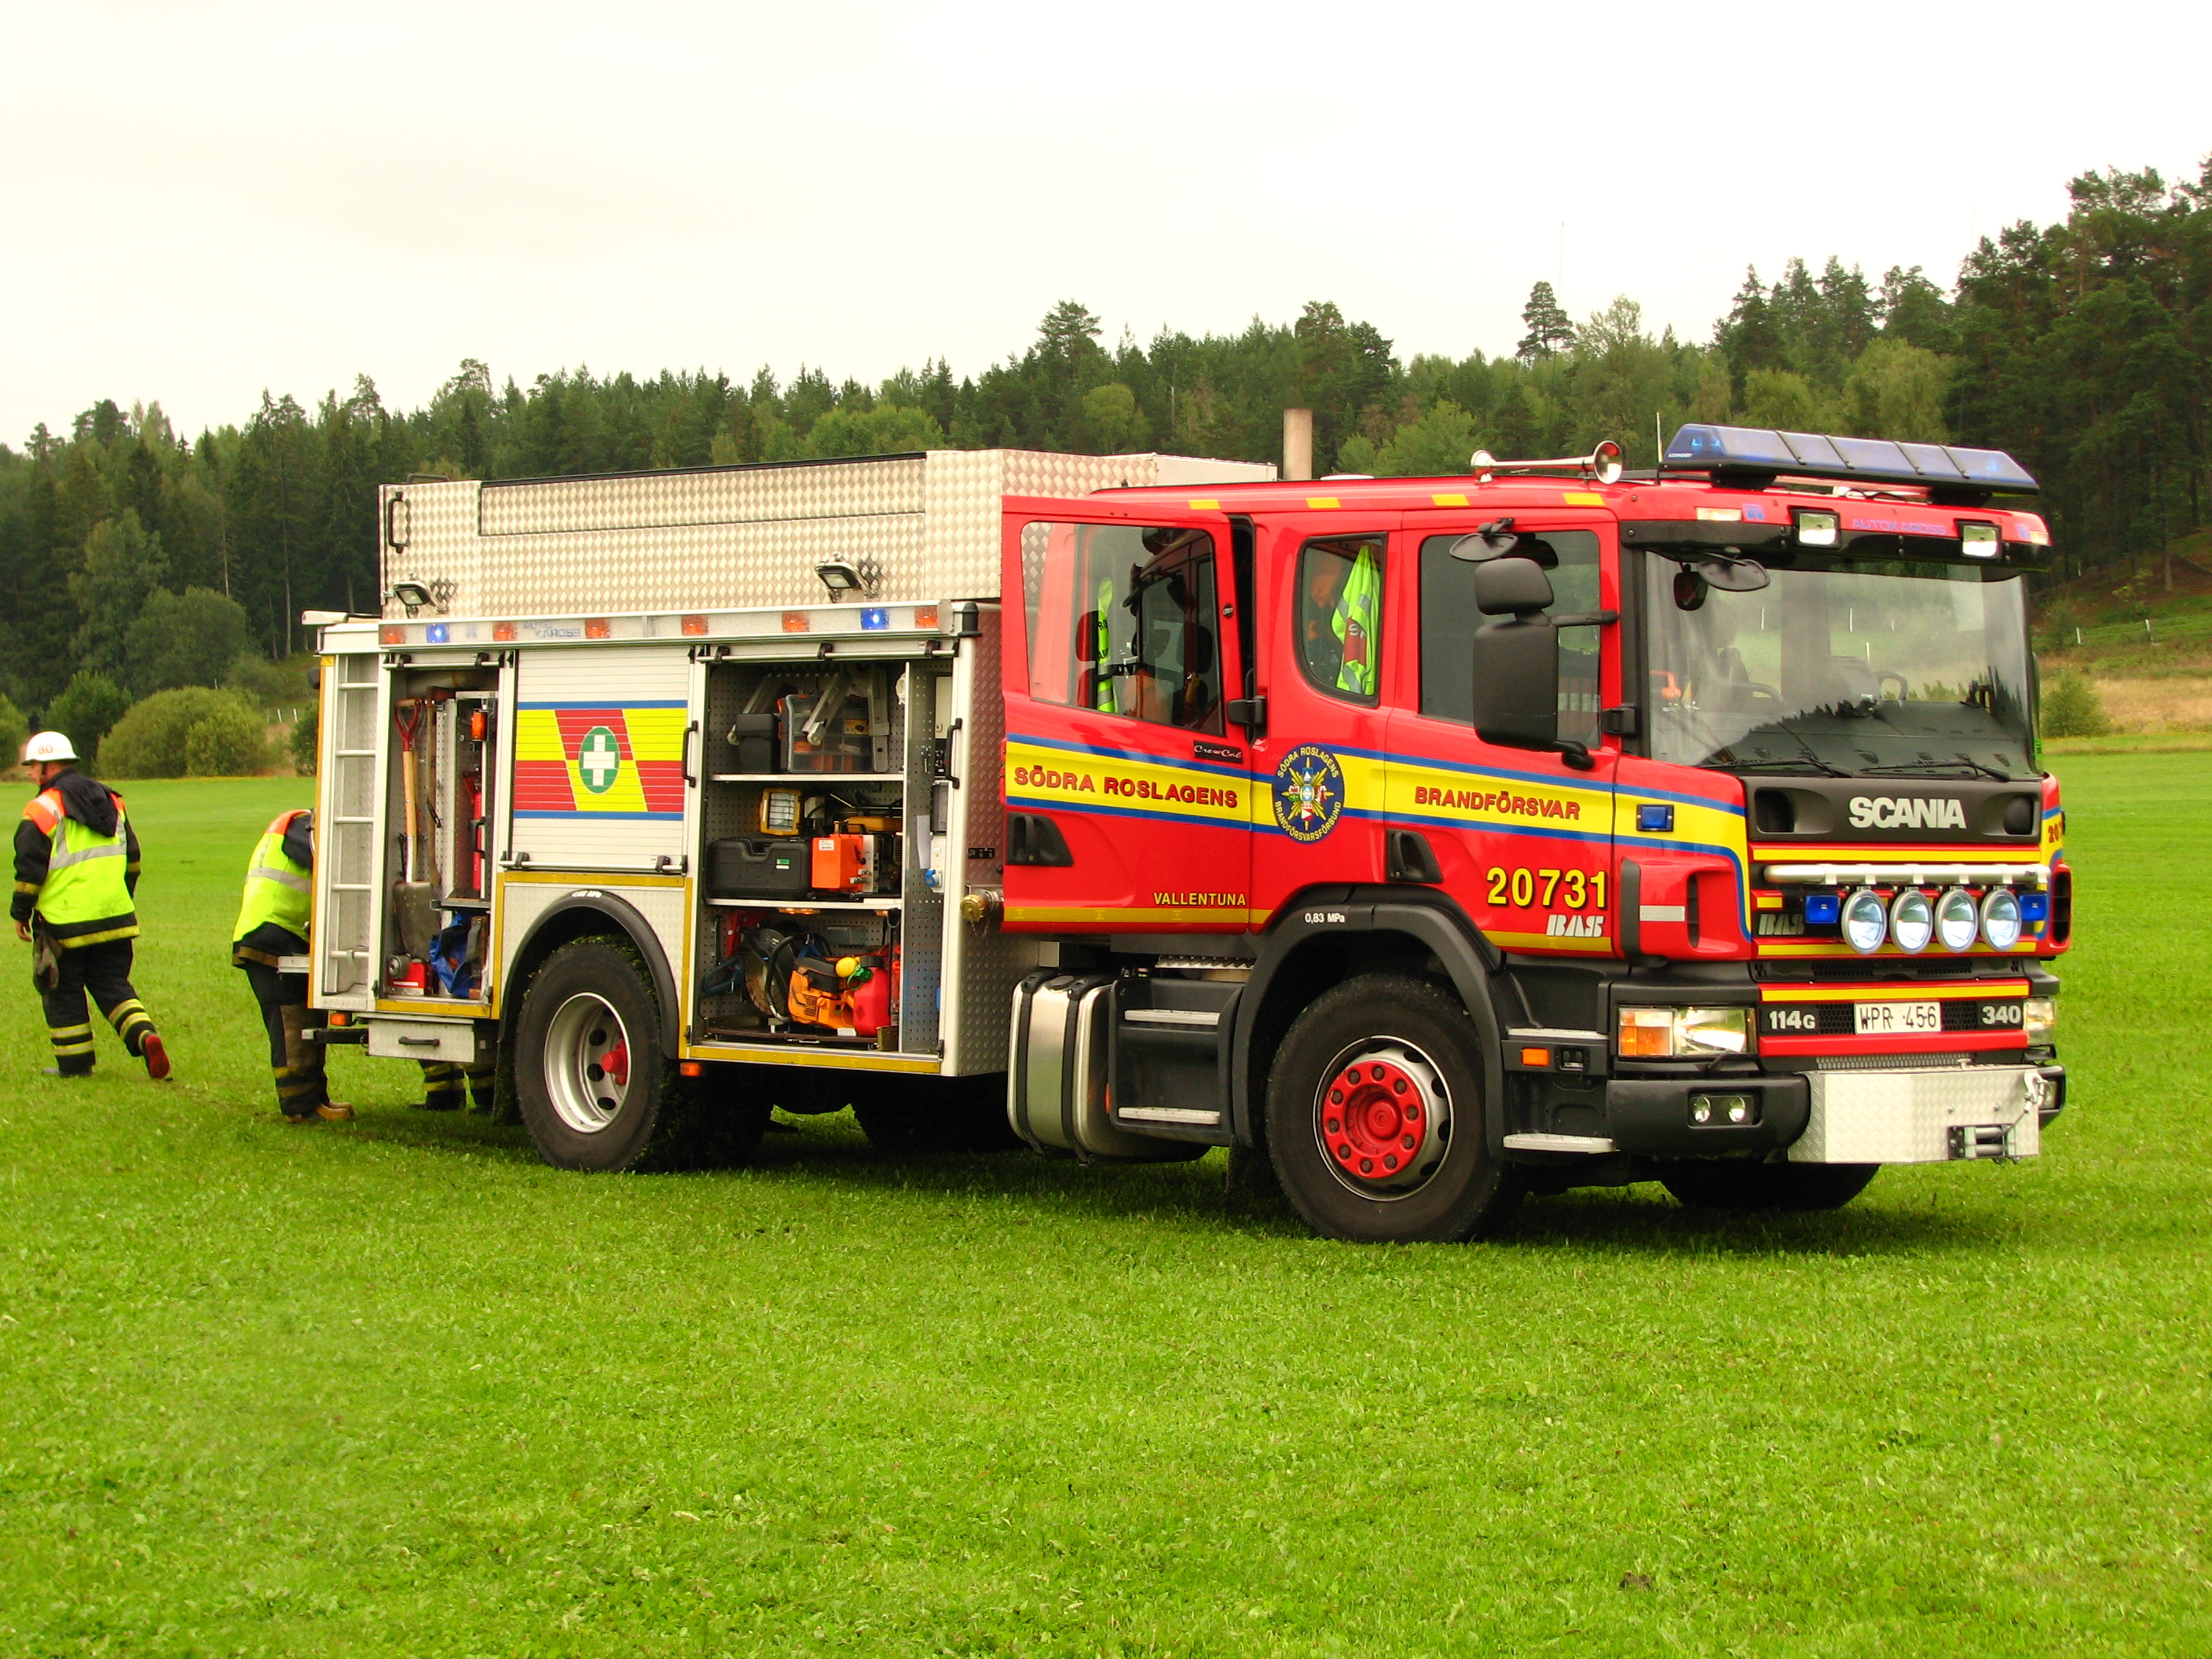 Scania Fire Truck Backgrounds, Compatible - PC, Mobile, Gadgets| 2816x2112 px